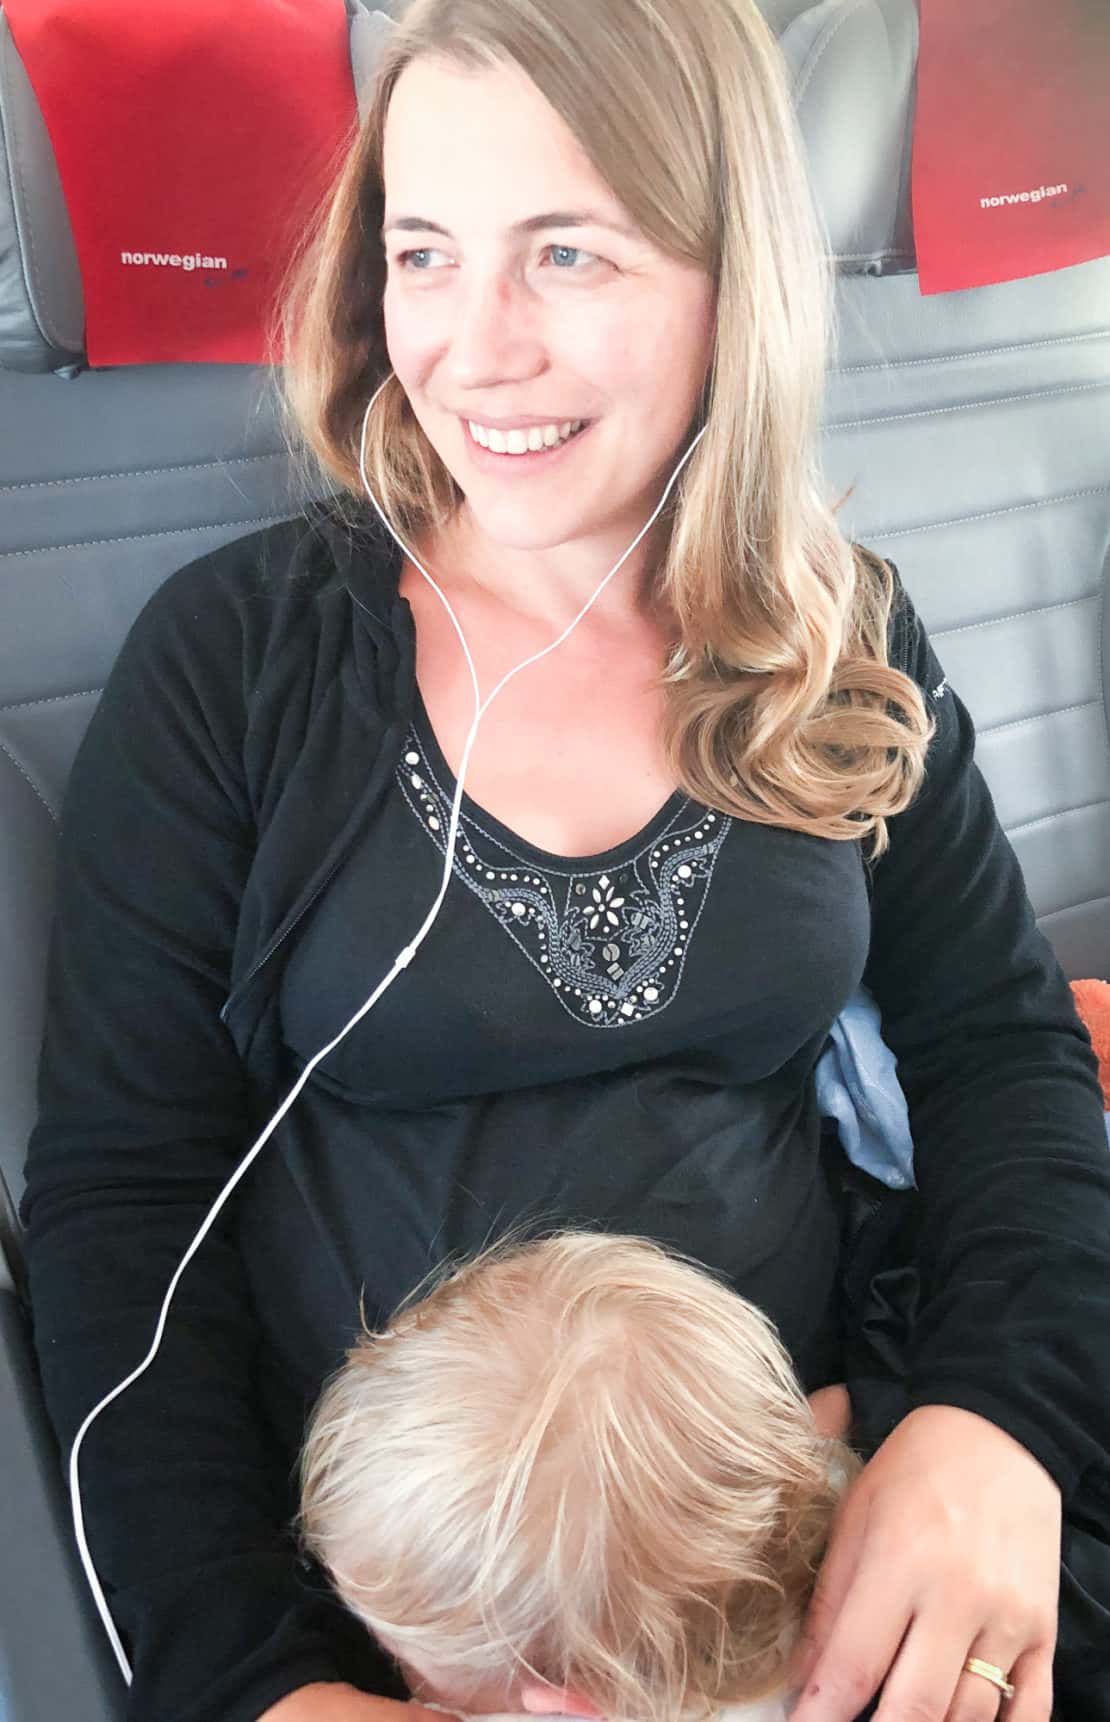 How to be comfortable on a plane when travelling with a breastfeeding baby